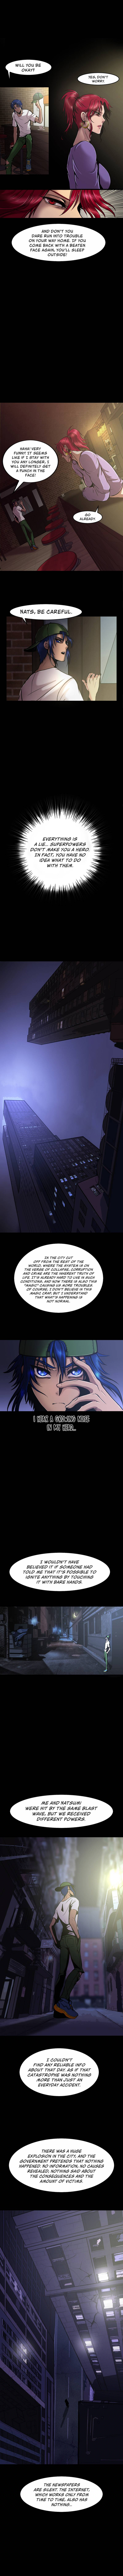 Darkness and Death Chapter 5 - Page 3